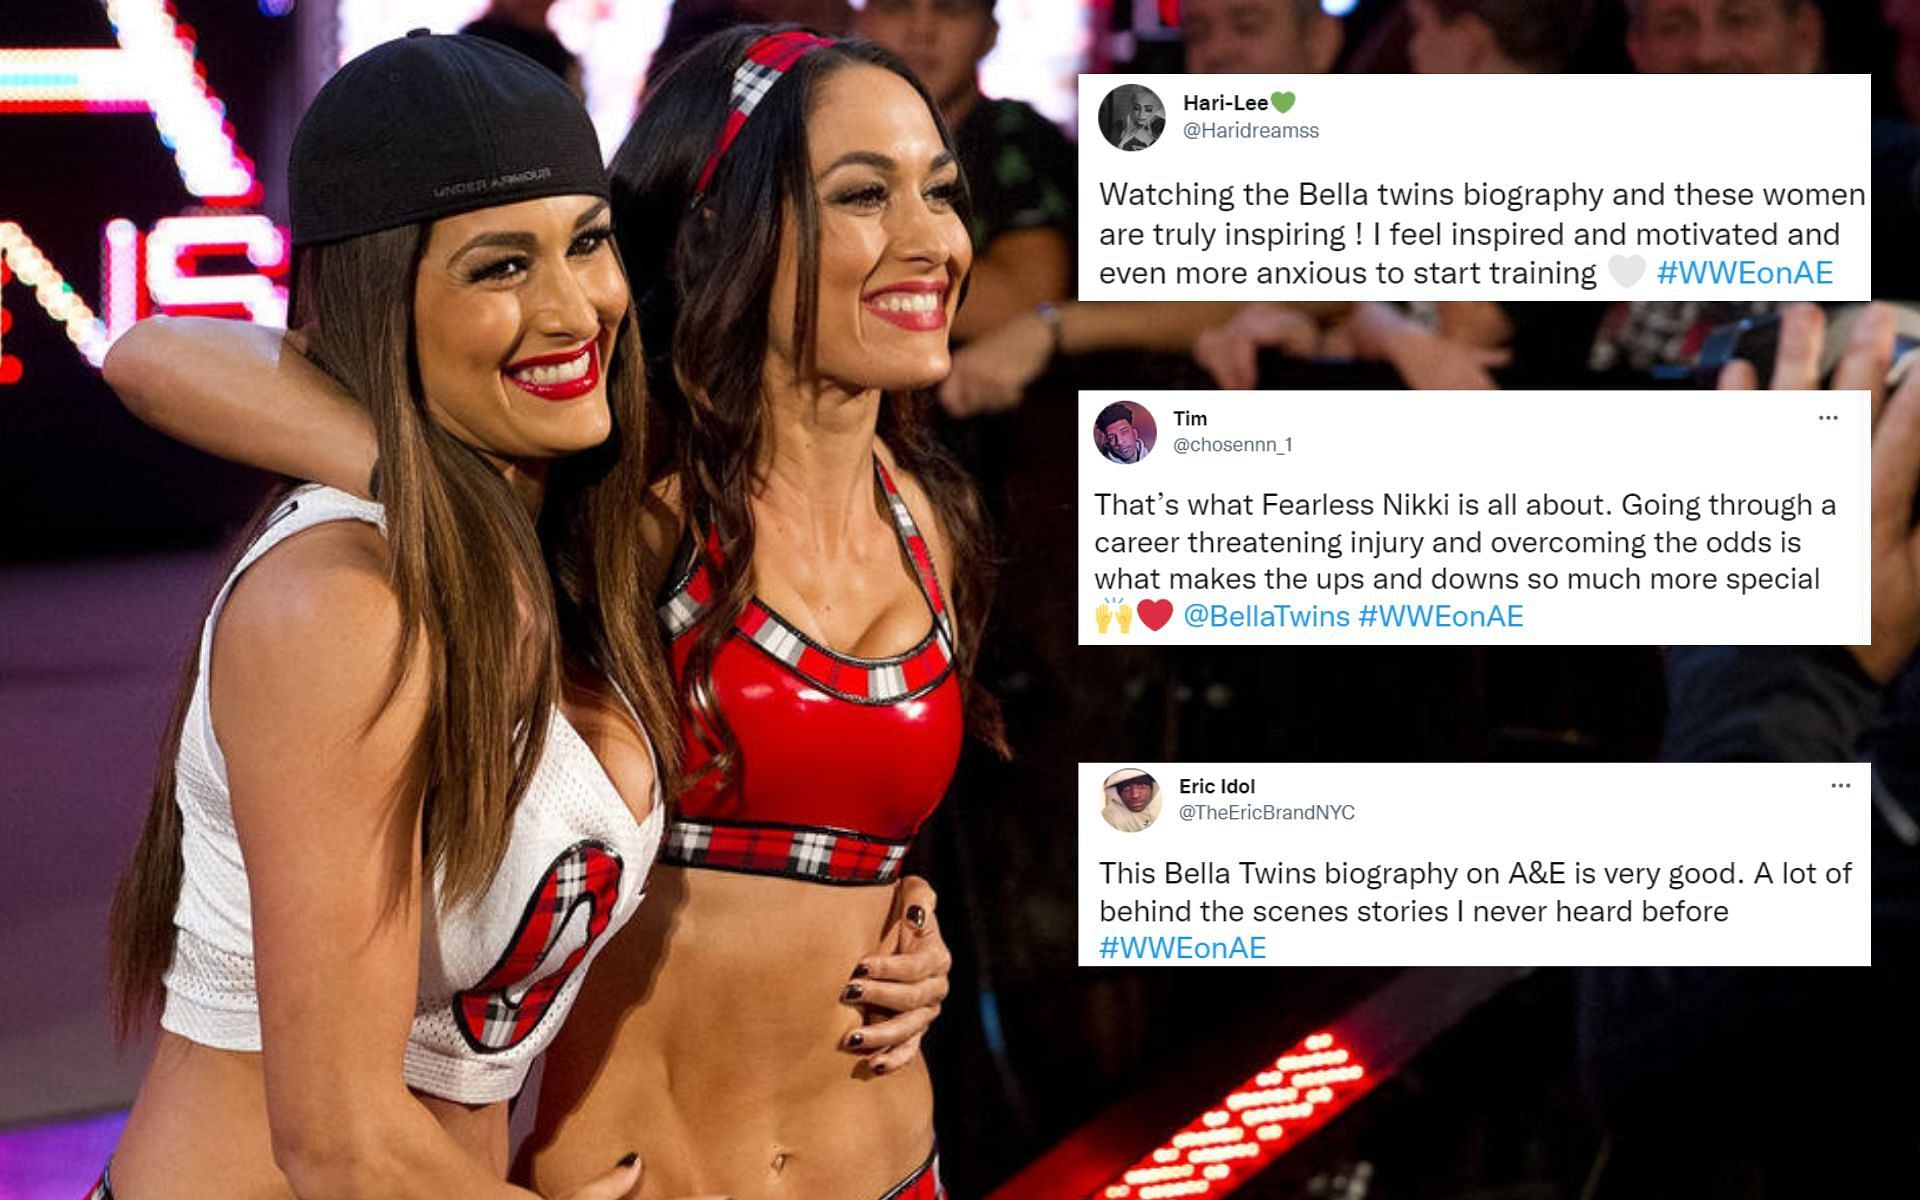 The Bella Twins captivated the fans during their time in WWE.